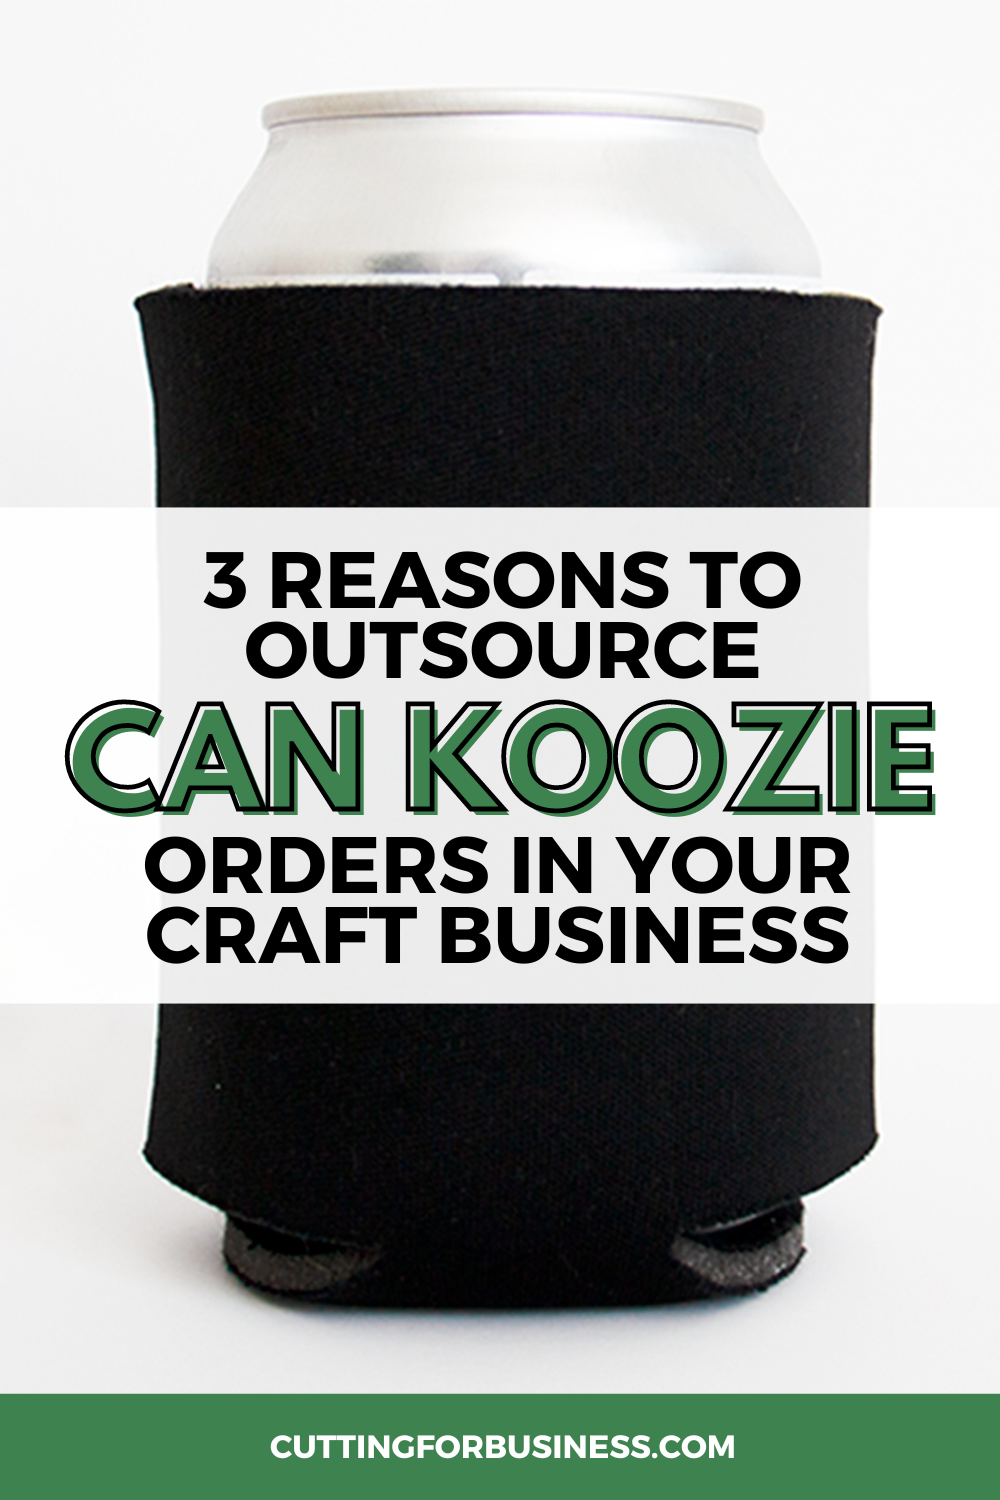 3 Reasons to Outsource Can Koozie Orders  - cuttingforbusiness.com